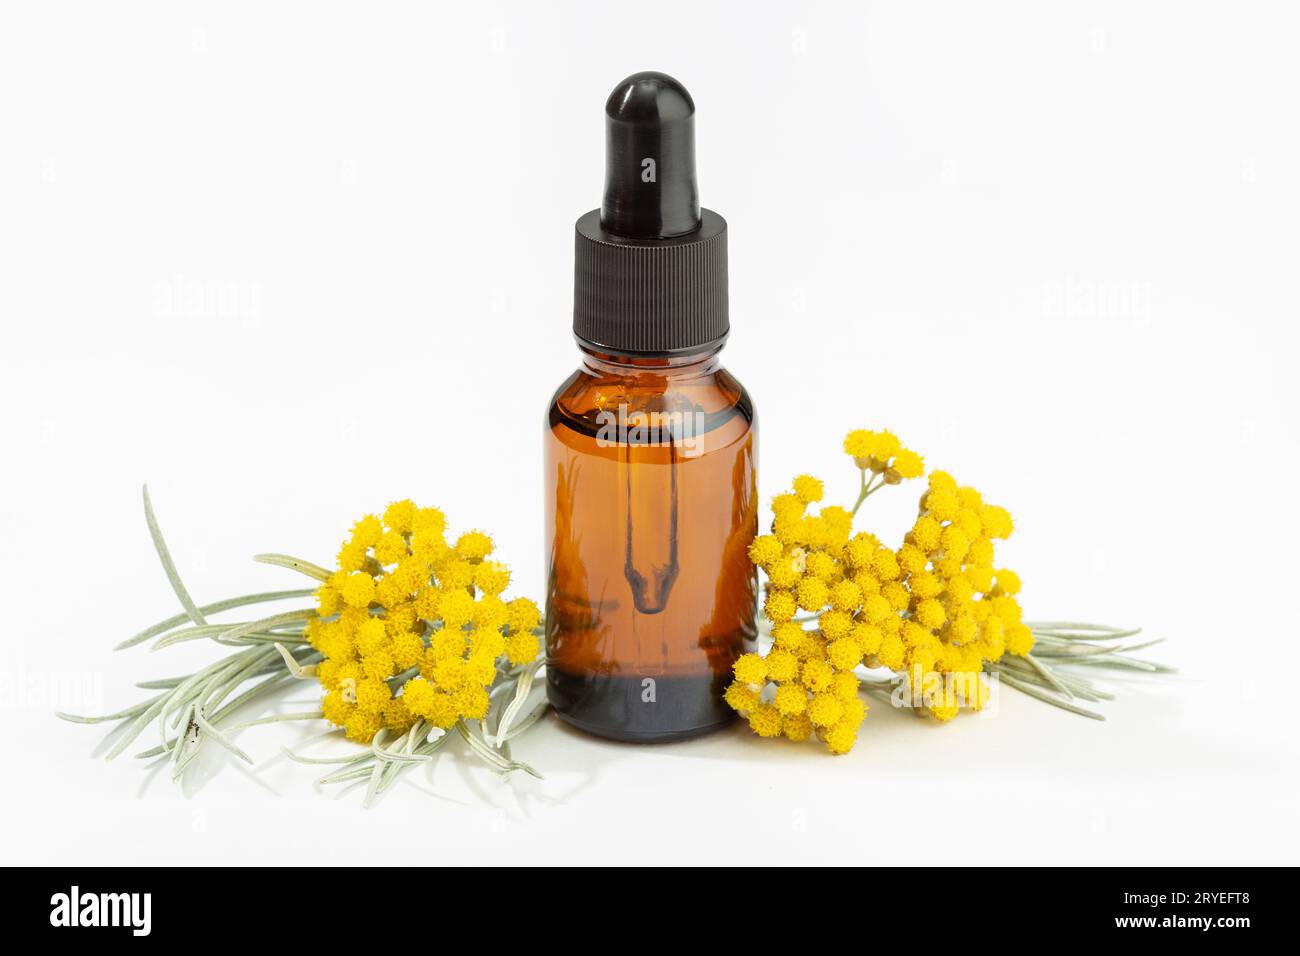 Helichrysum essential oil on amber bottle isolated on white background Stock Photo